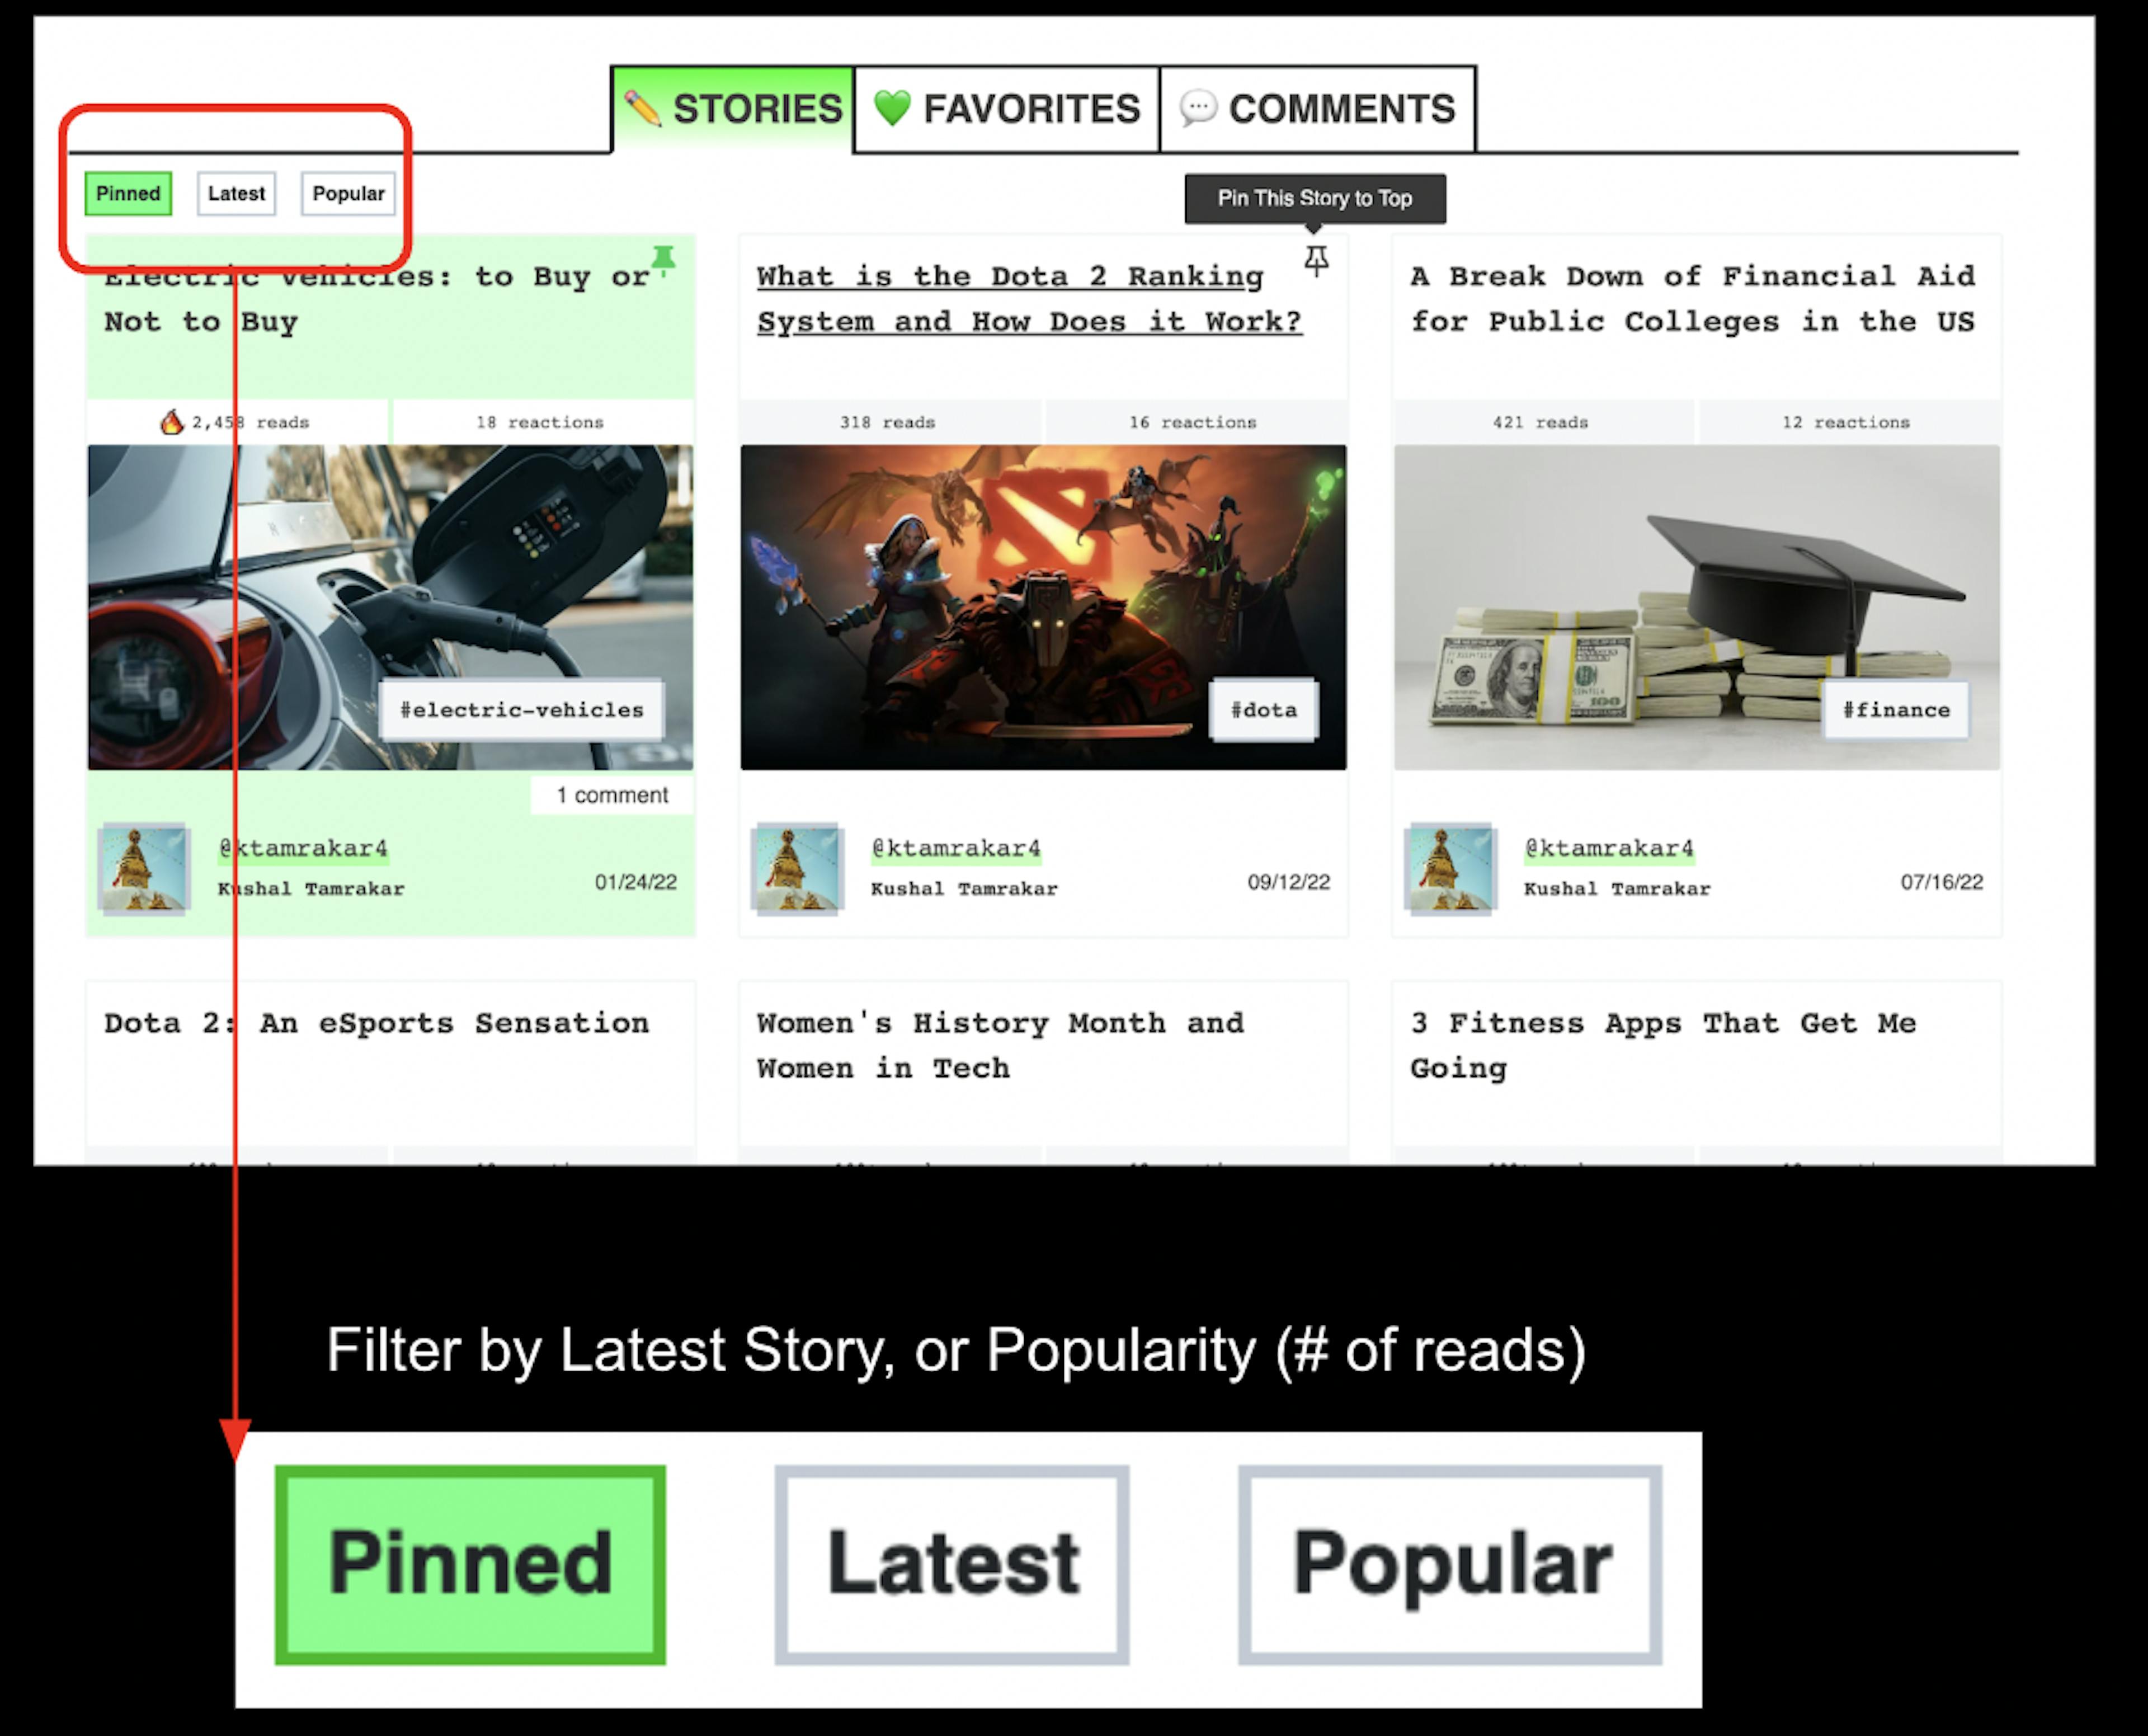 You can now filter stories according to your preference